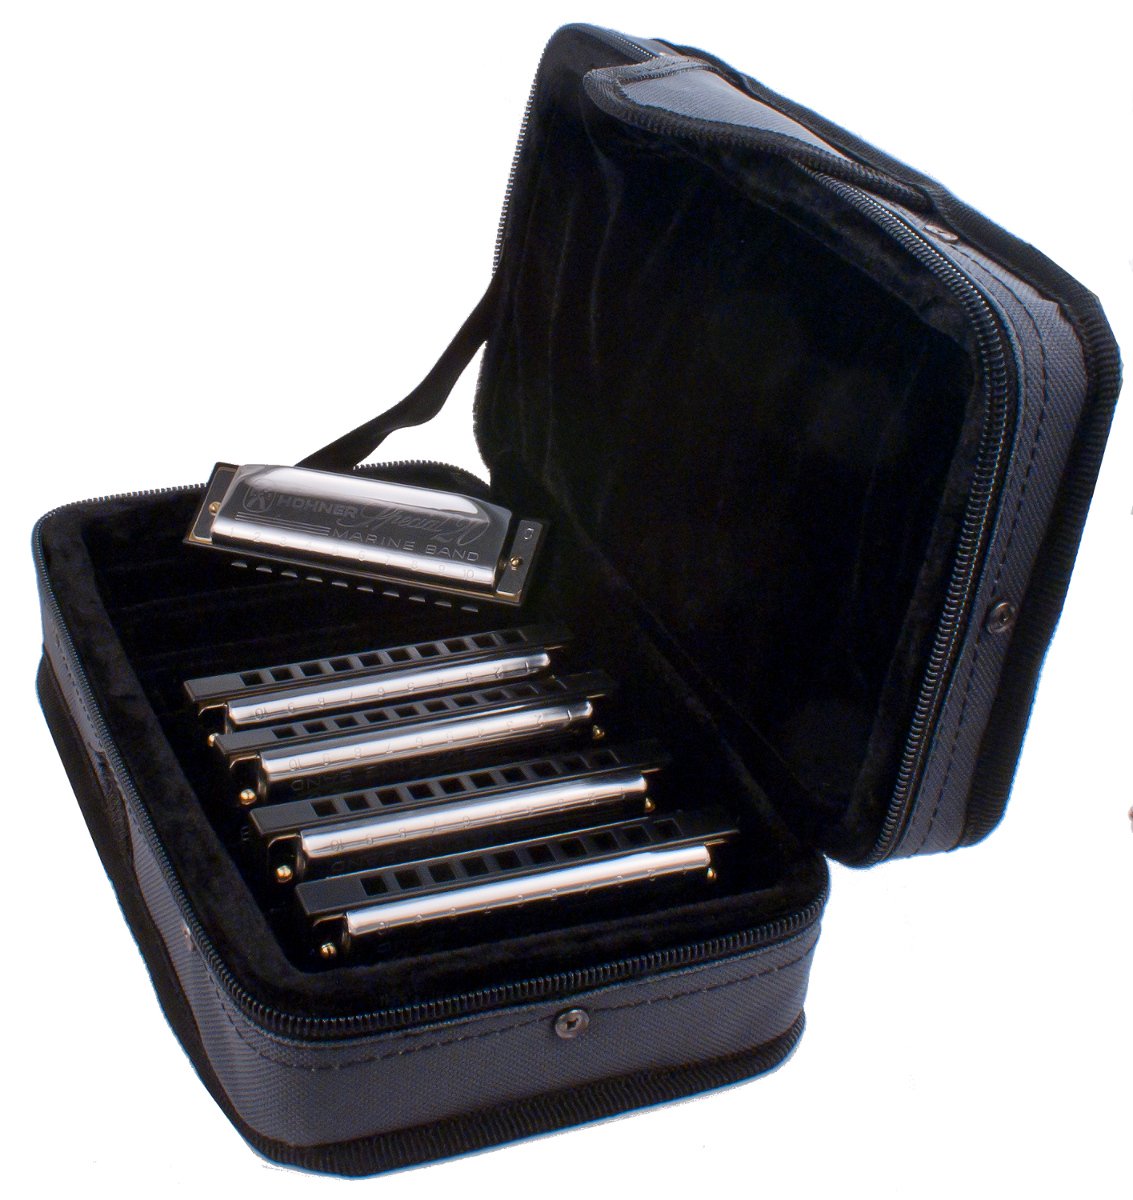 Hohner SPC Special 20 5-Piece Pro Pack Diatonic Harmonica Key of C, G, A, D  and E